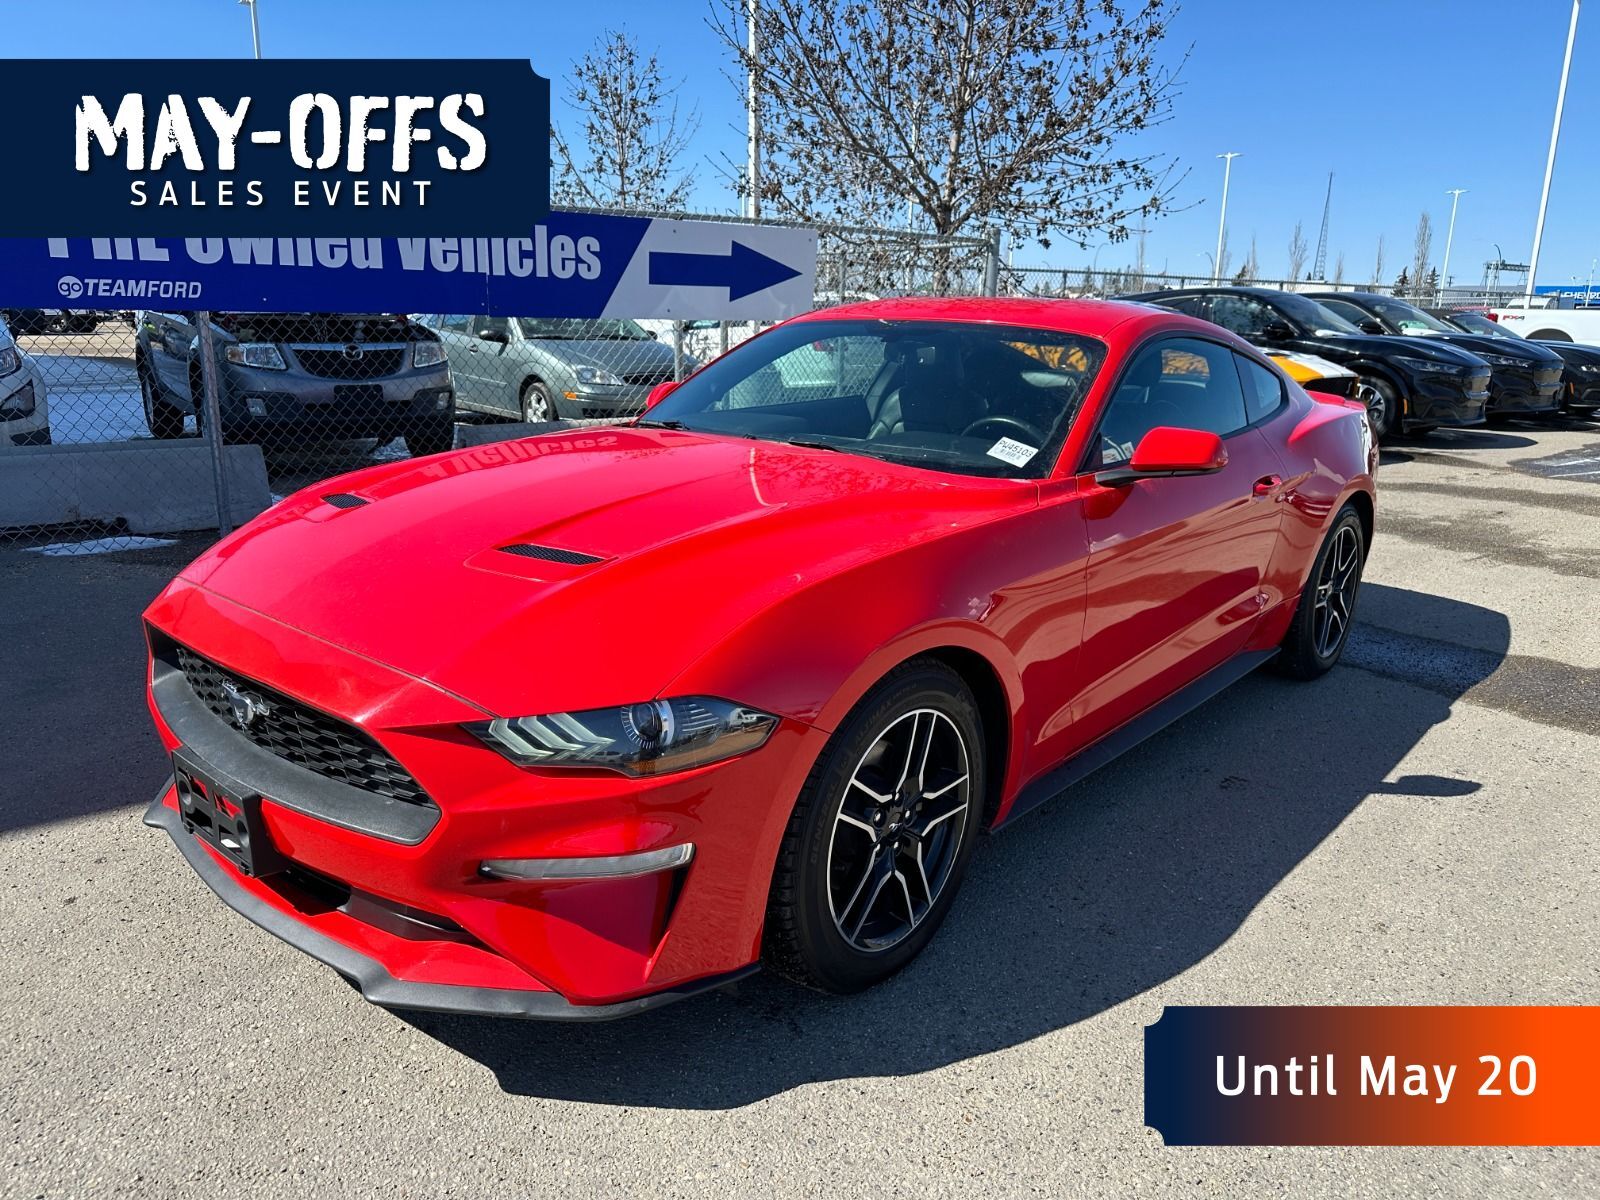 2019 Ford Mustang ECOBOOST - BACK UP CAM, LEATHER, 2.3L,SYNC VOICE A